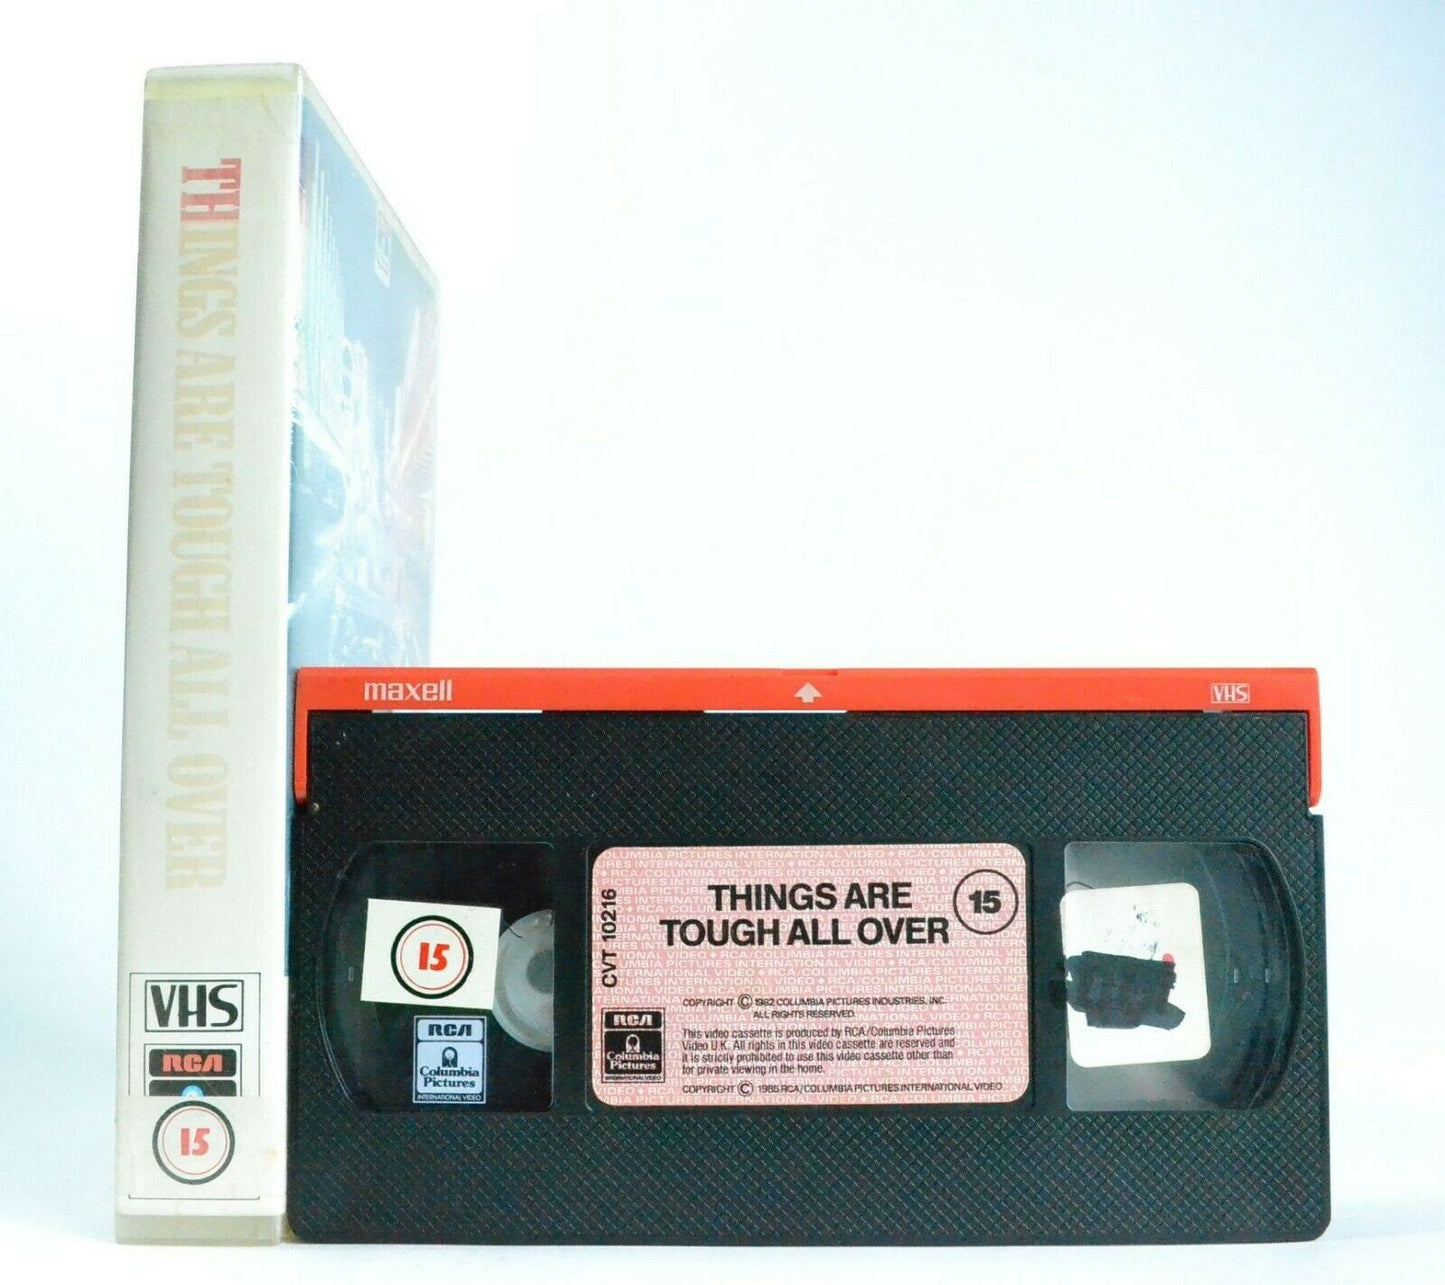 Things Are Tough All Over: C.Marin/T.Chong - Comedy - Large Box - Pre-Cert - VHS-